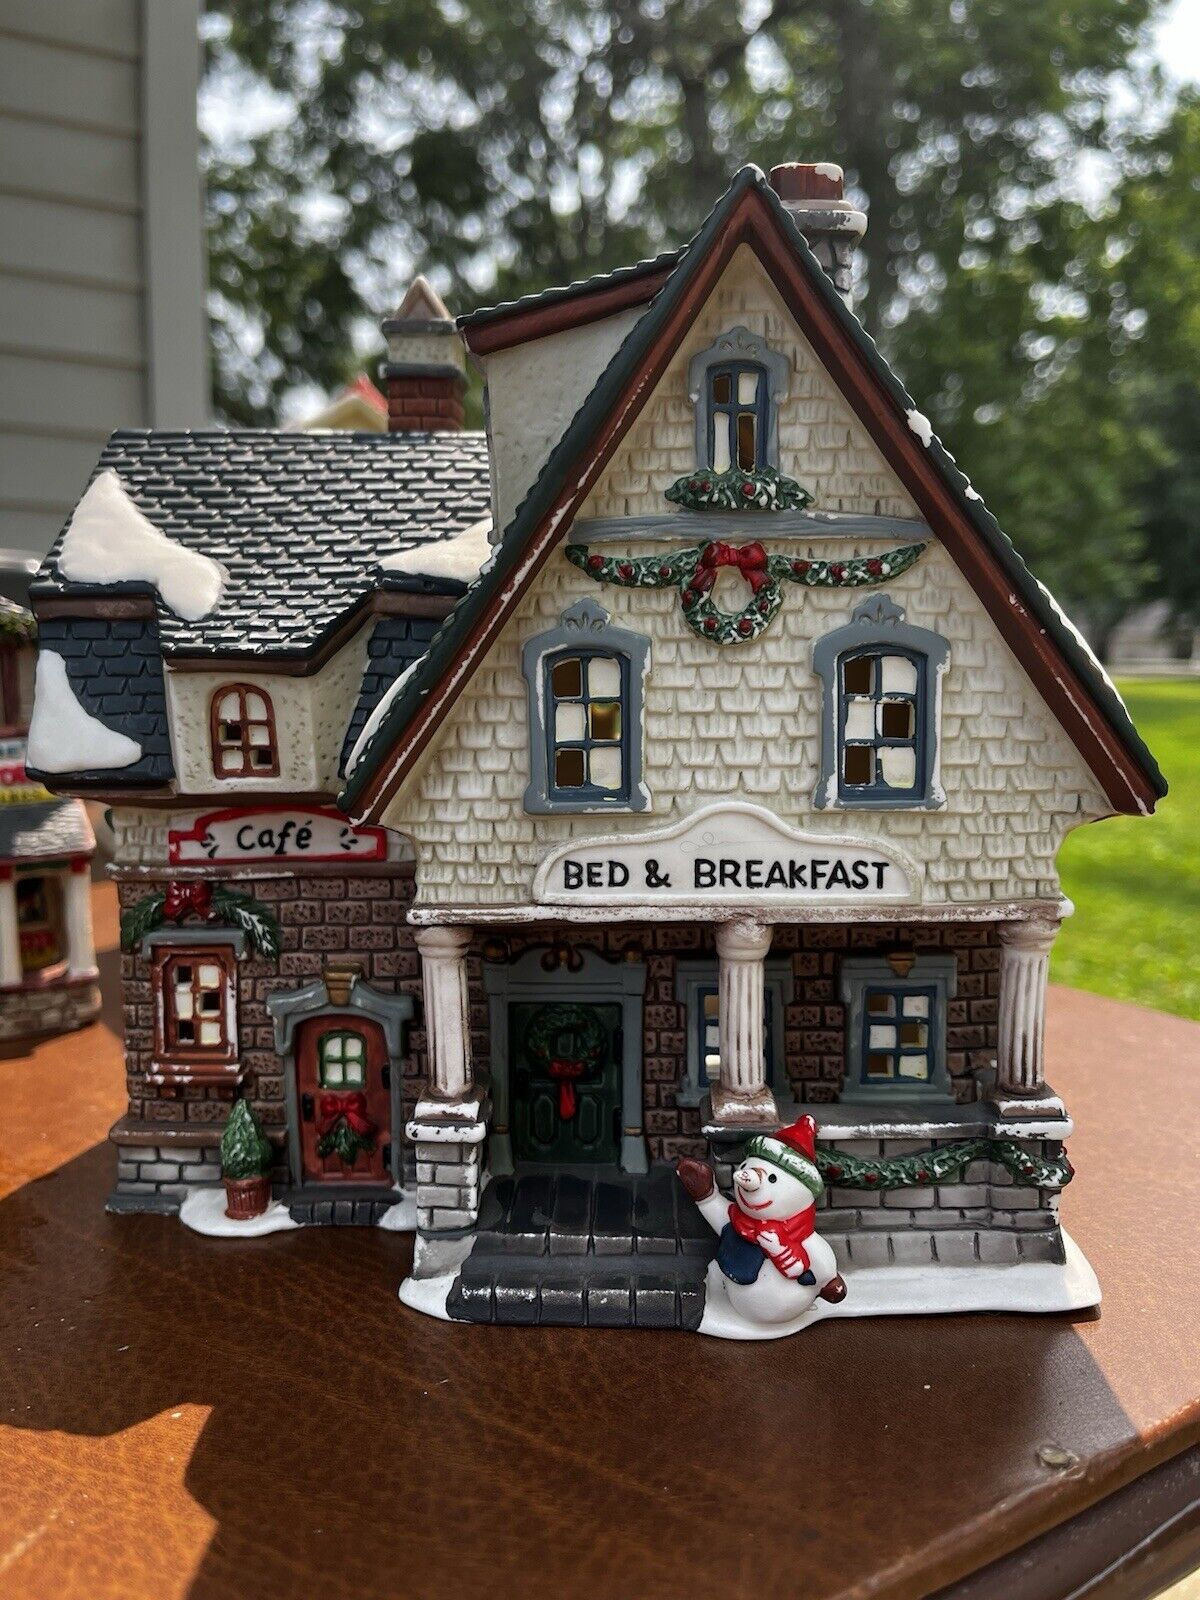 Holiday Time Christmas Village “Bed & Breakfast” Lighted Porcelain Hand Painted